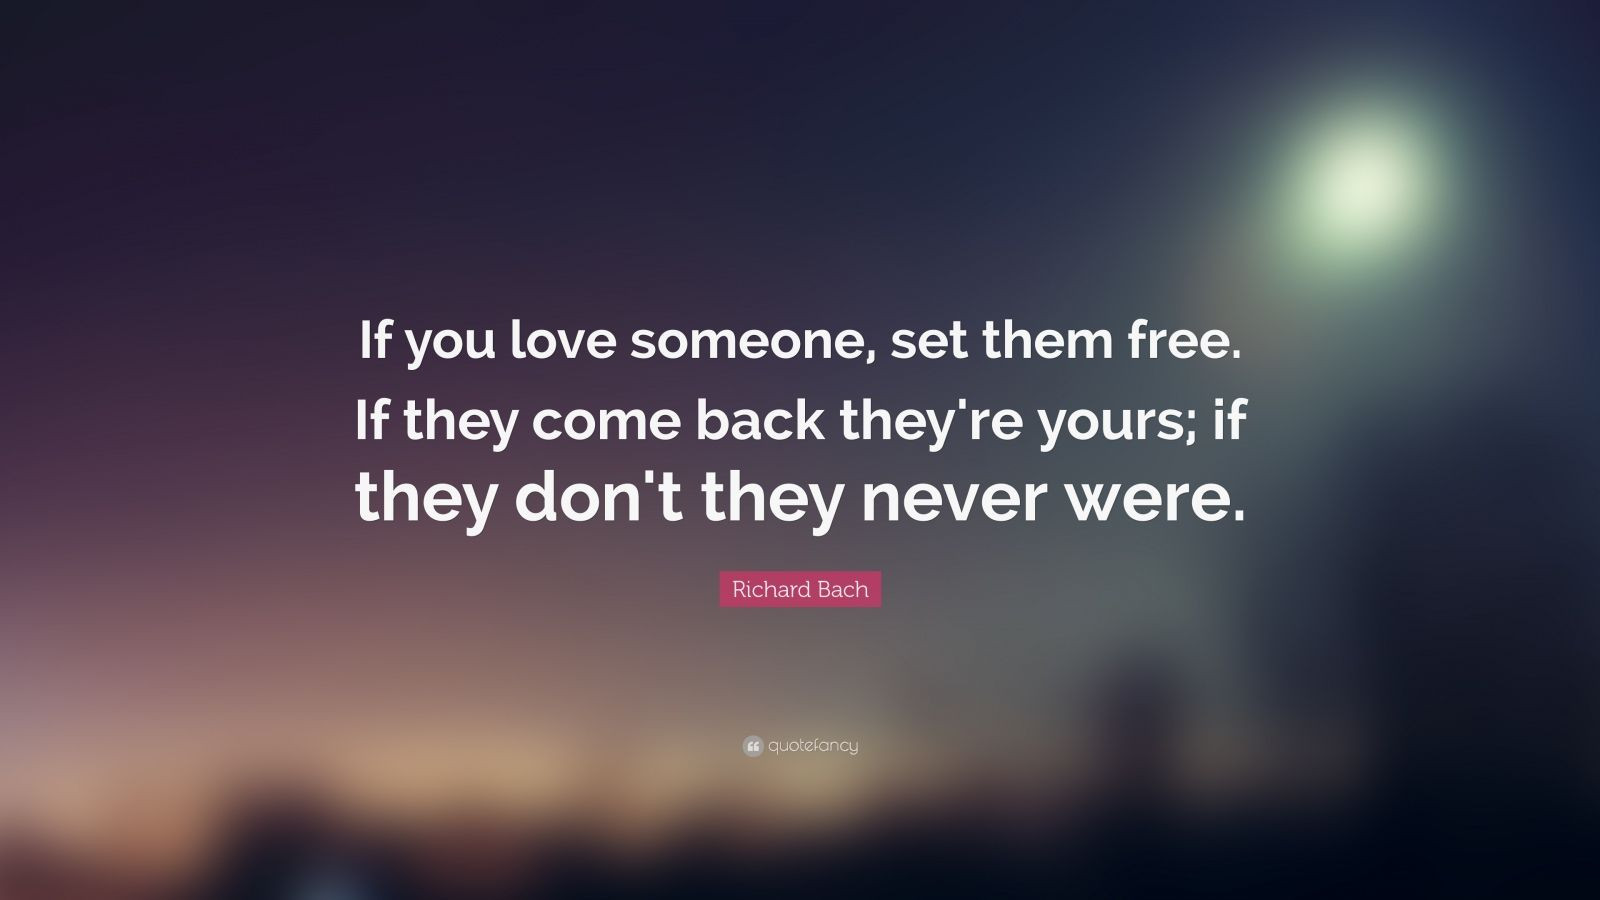 If You Love Someone Set Them Free Quote
 Richard Bach Quote “If you love someone set them free